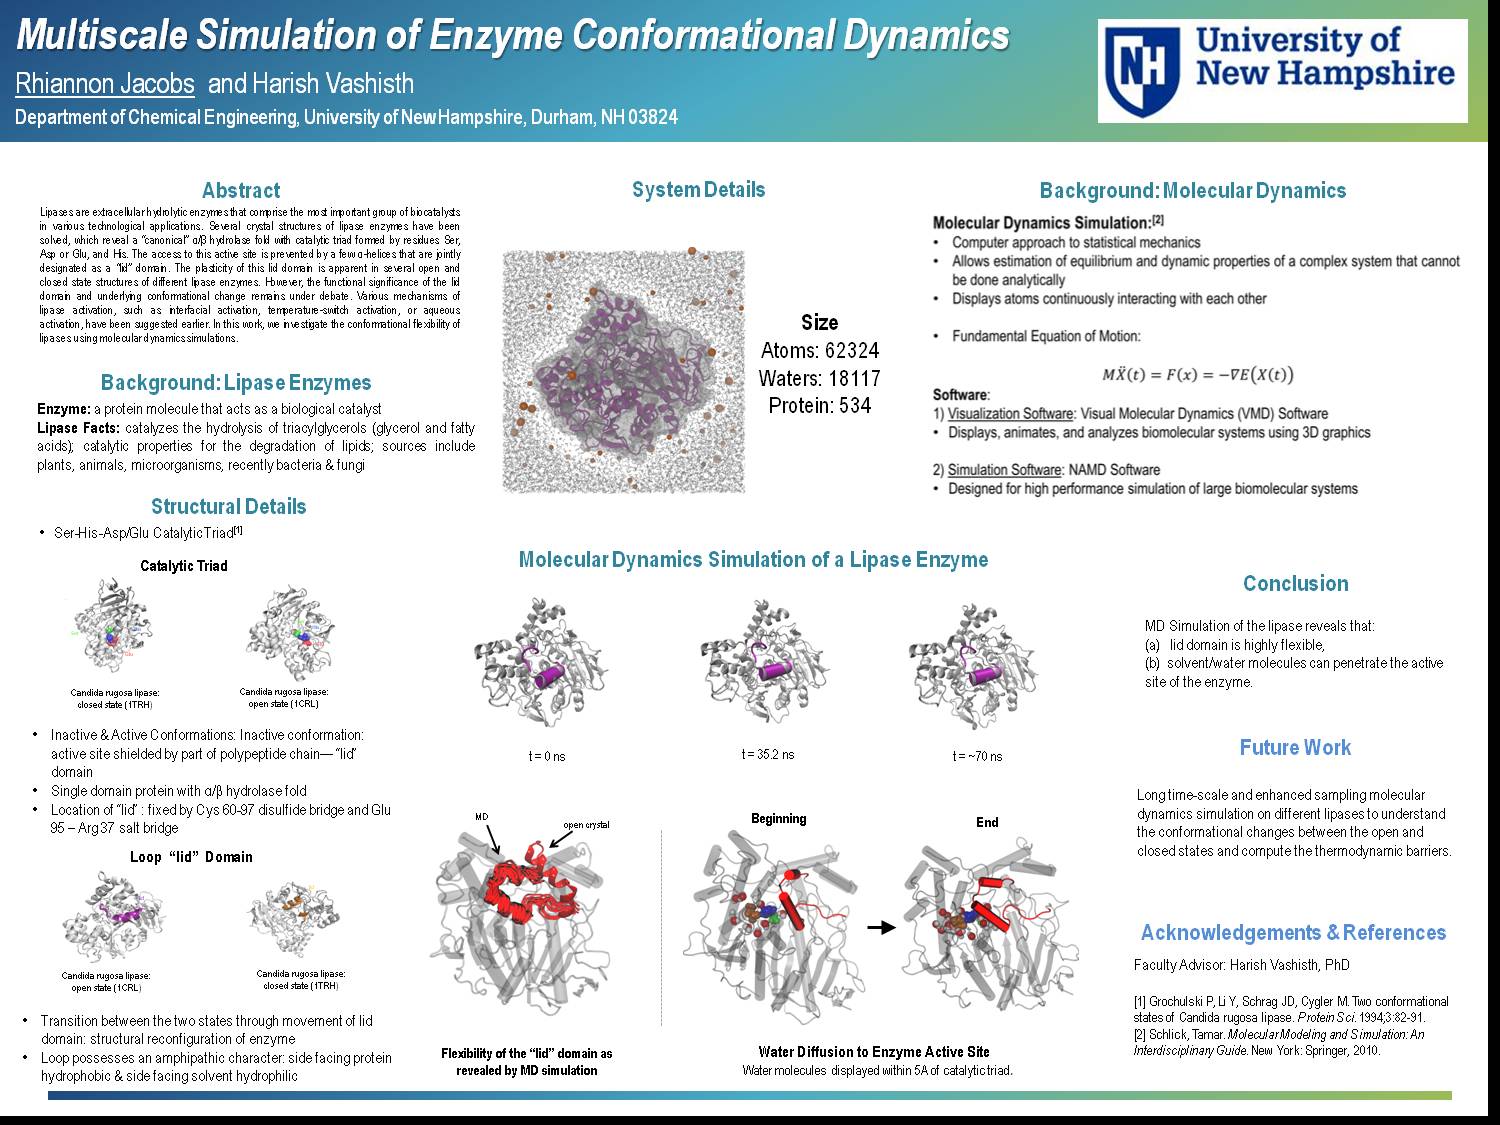 Multiscale Simulation Of Enzyme Conformational Dynamics by rlk58